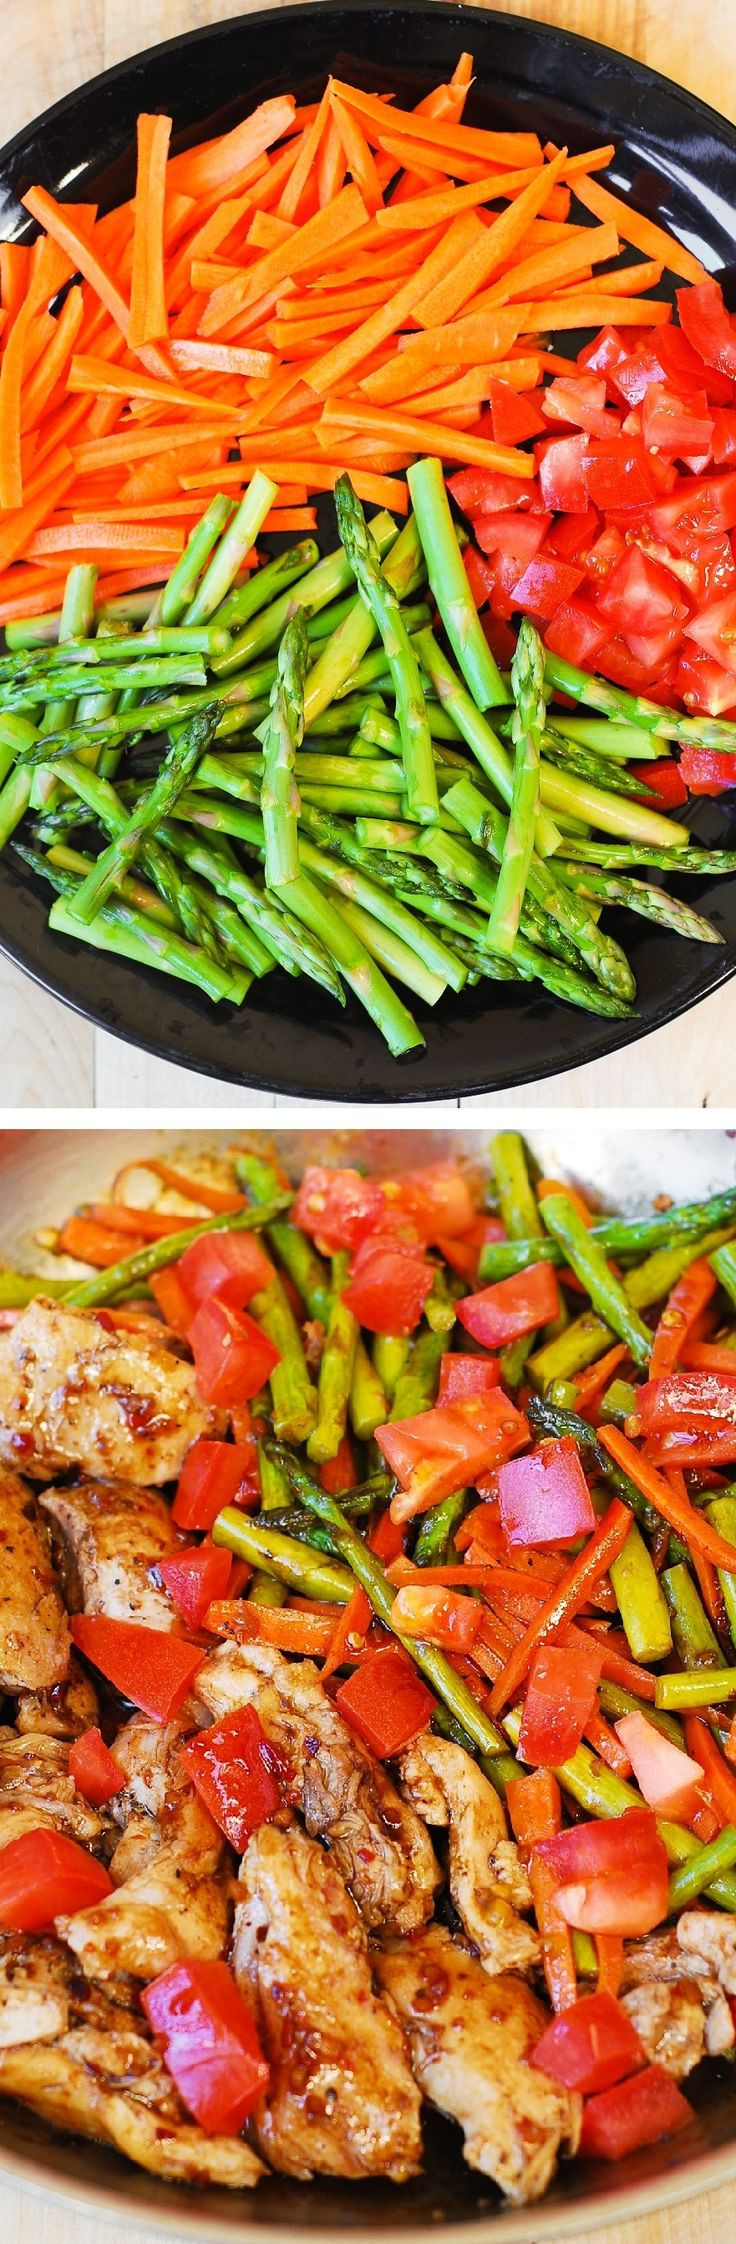 Low Fat Dinner Recipes For Two
 175 best images about low or no salt recipes on Pinterest